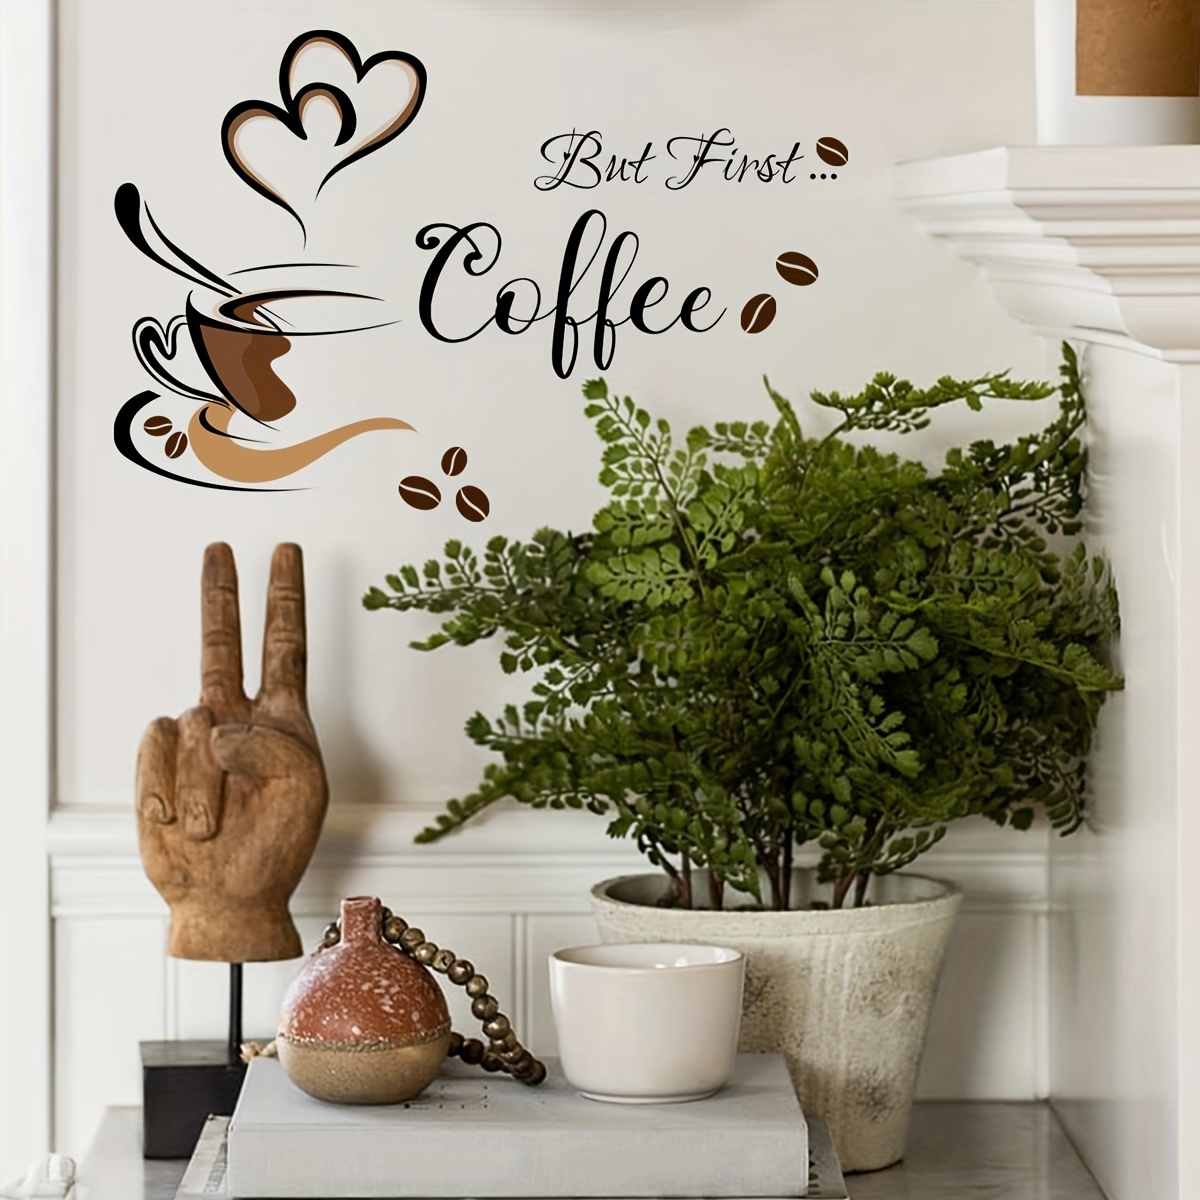 Wall Words Decorations for Living Room Peel And Stick Arch Decal Arrival  Tea Mugs Coffee Coffee Decal Sticker Beautiful Art Design Wall Home Decor Sticky  Tiles for Walls Bathroom 